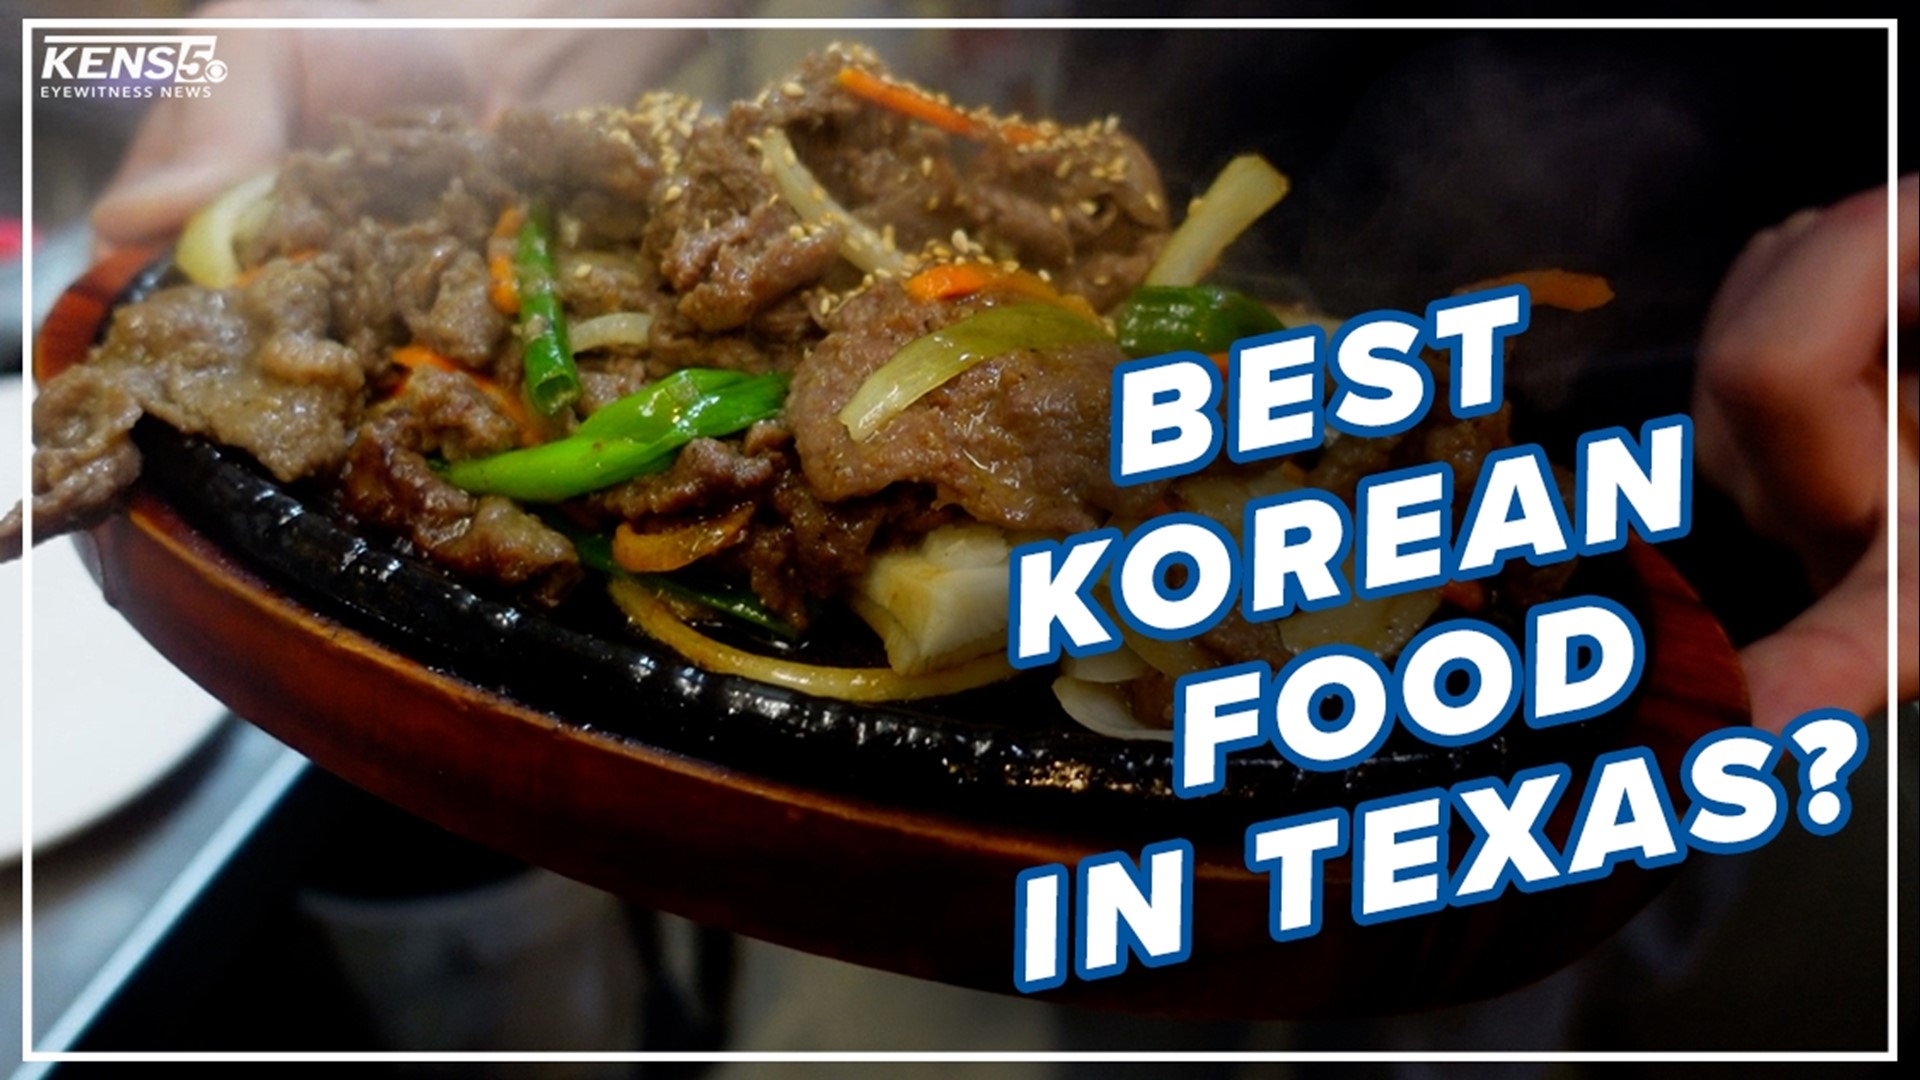 There's a local restaurant and market that has been around since the 1980s, not far from downtown, serving up authentic Korean food.